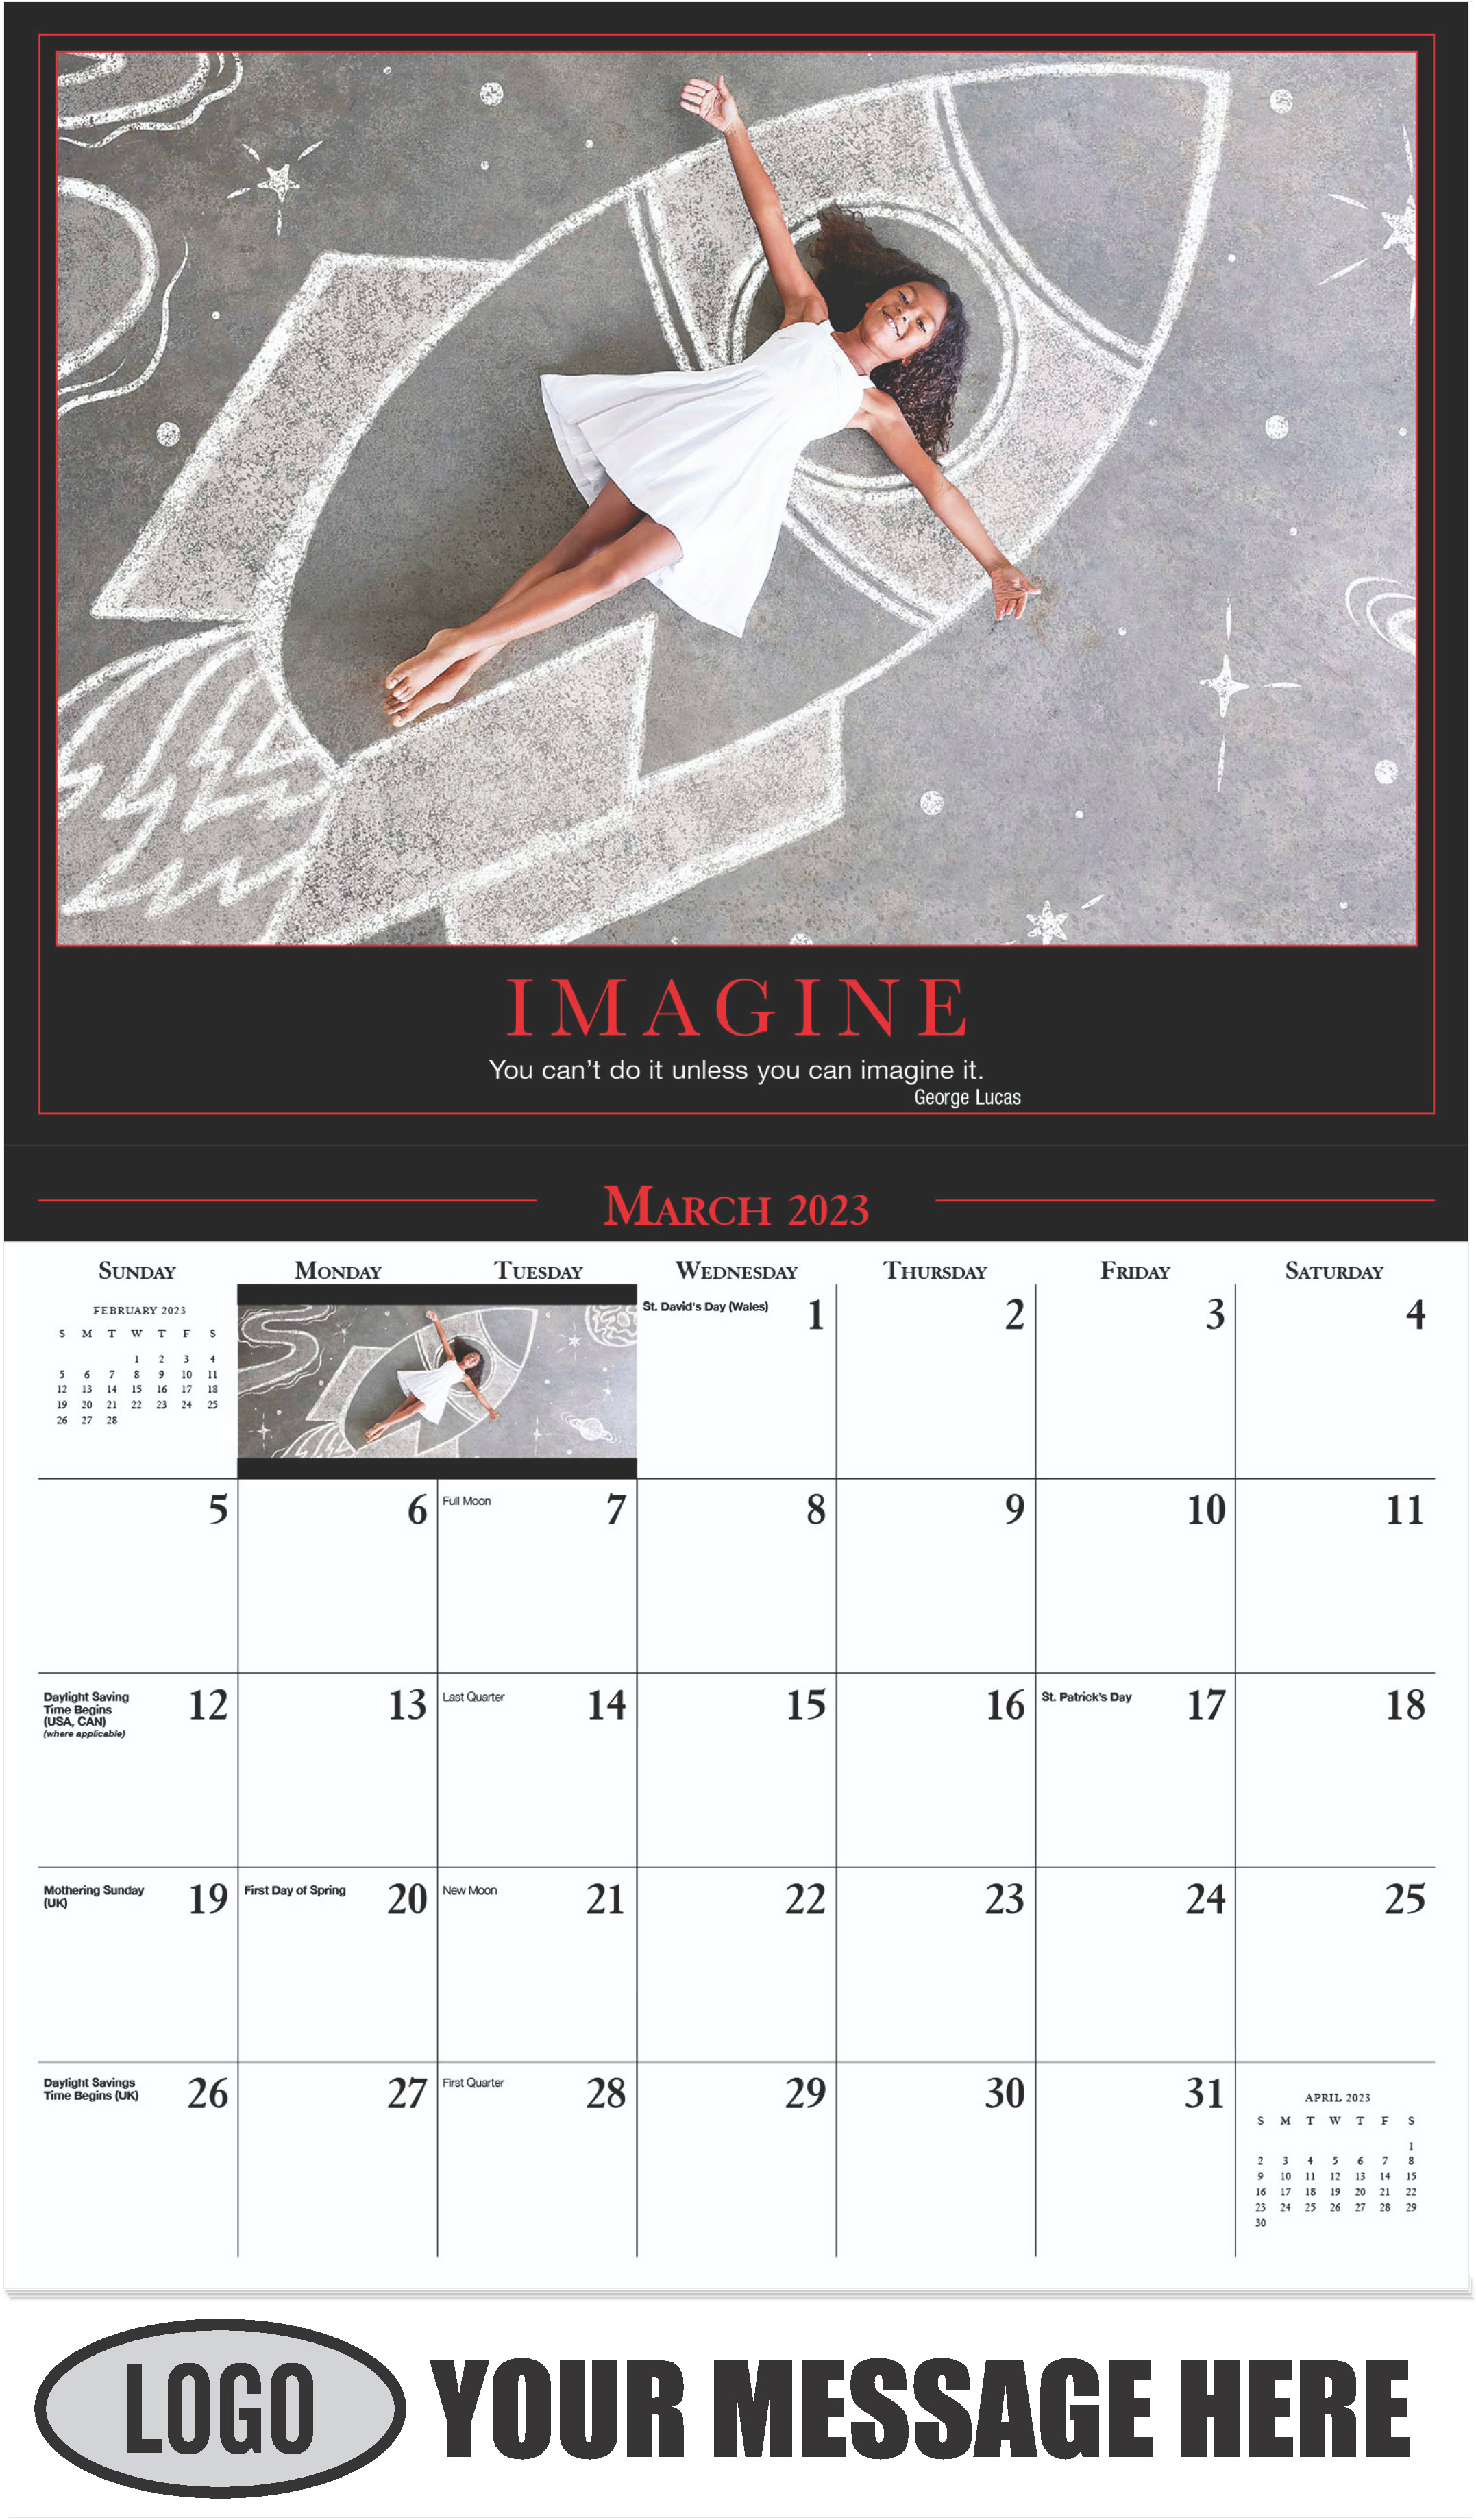 IMAGINE ''You can't do it unless you can imagine it.'' - George Lucas - March - Motivation 2023 Promotional Calendar